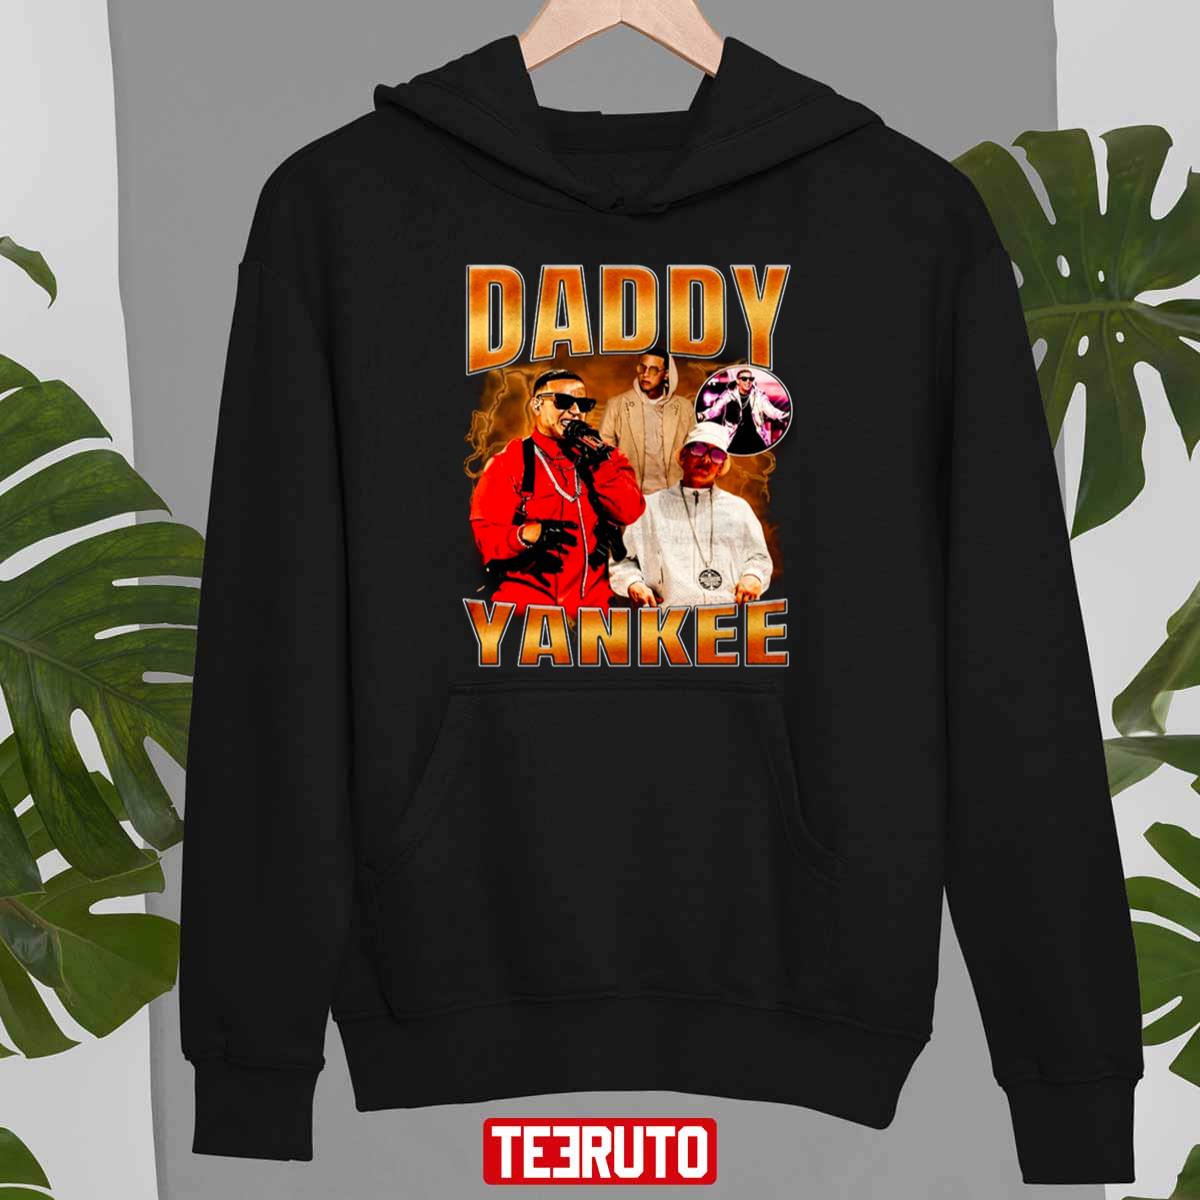 Vintage Daddy Yankee T Shirt Tank Top - Jolly Family Gifts